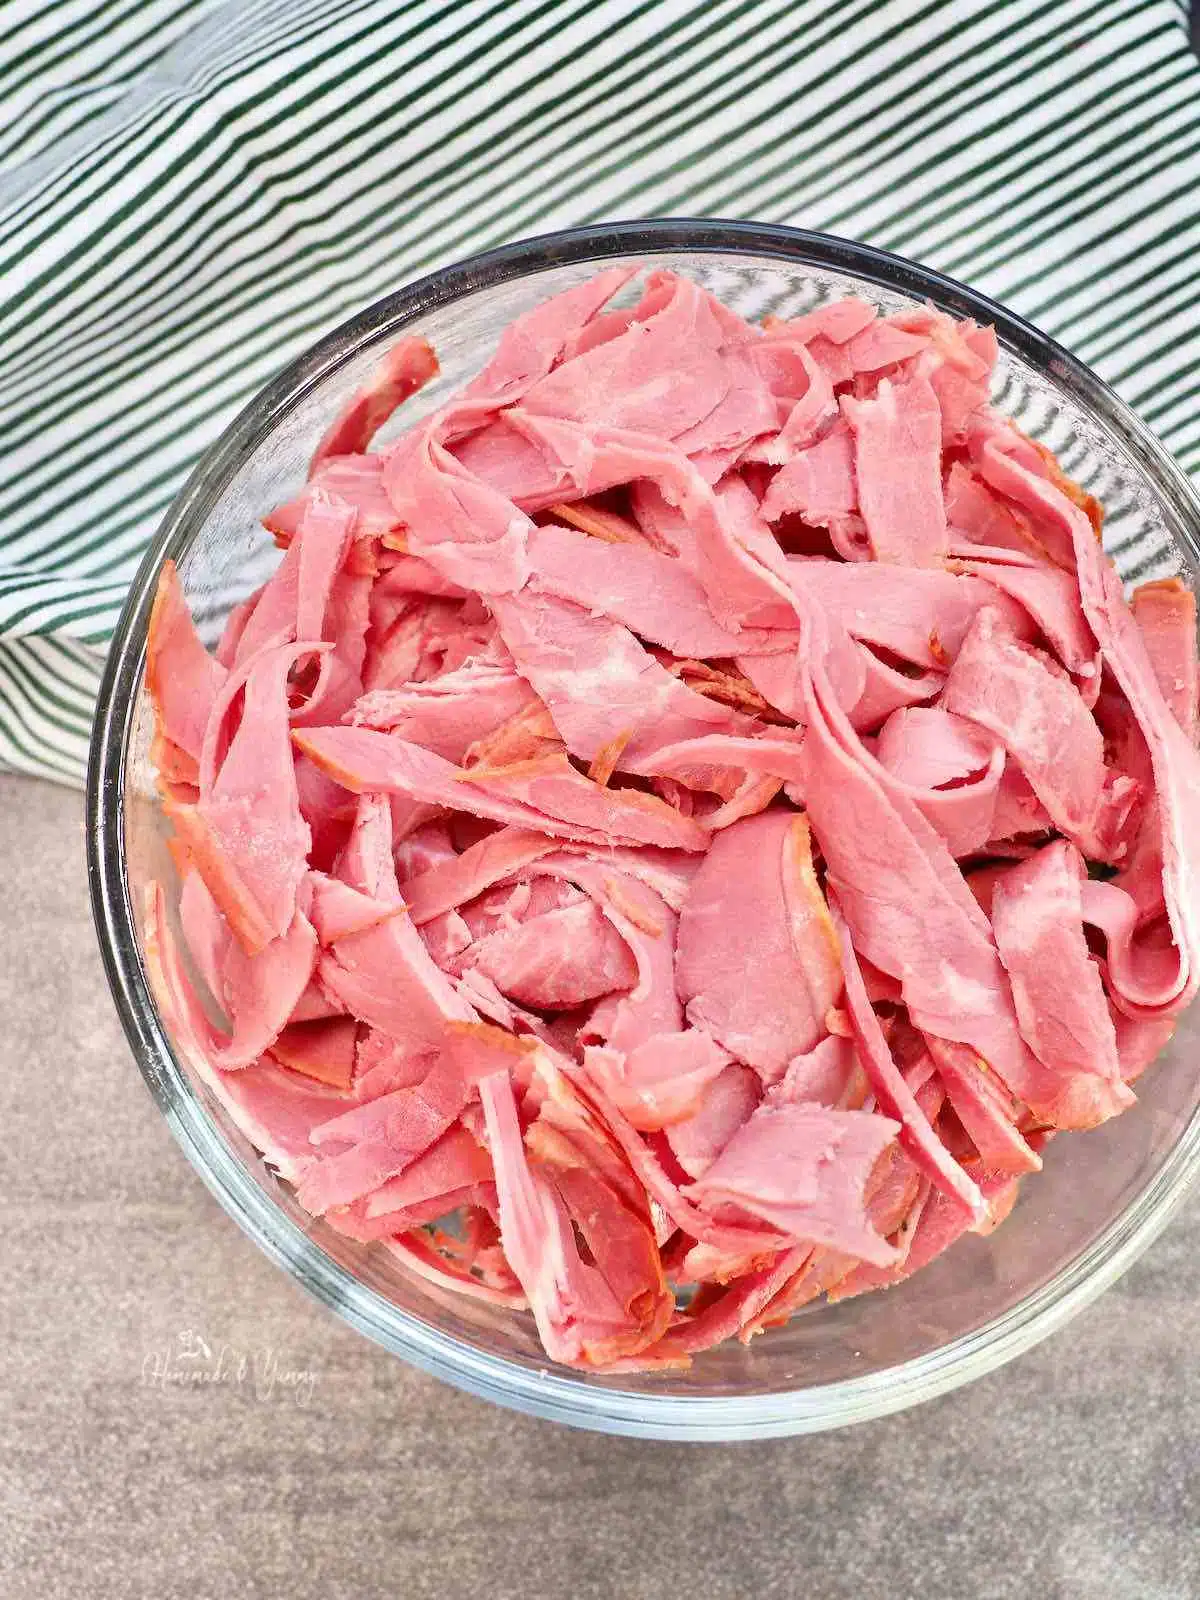 Sliced corned beef in a bowl.